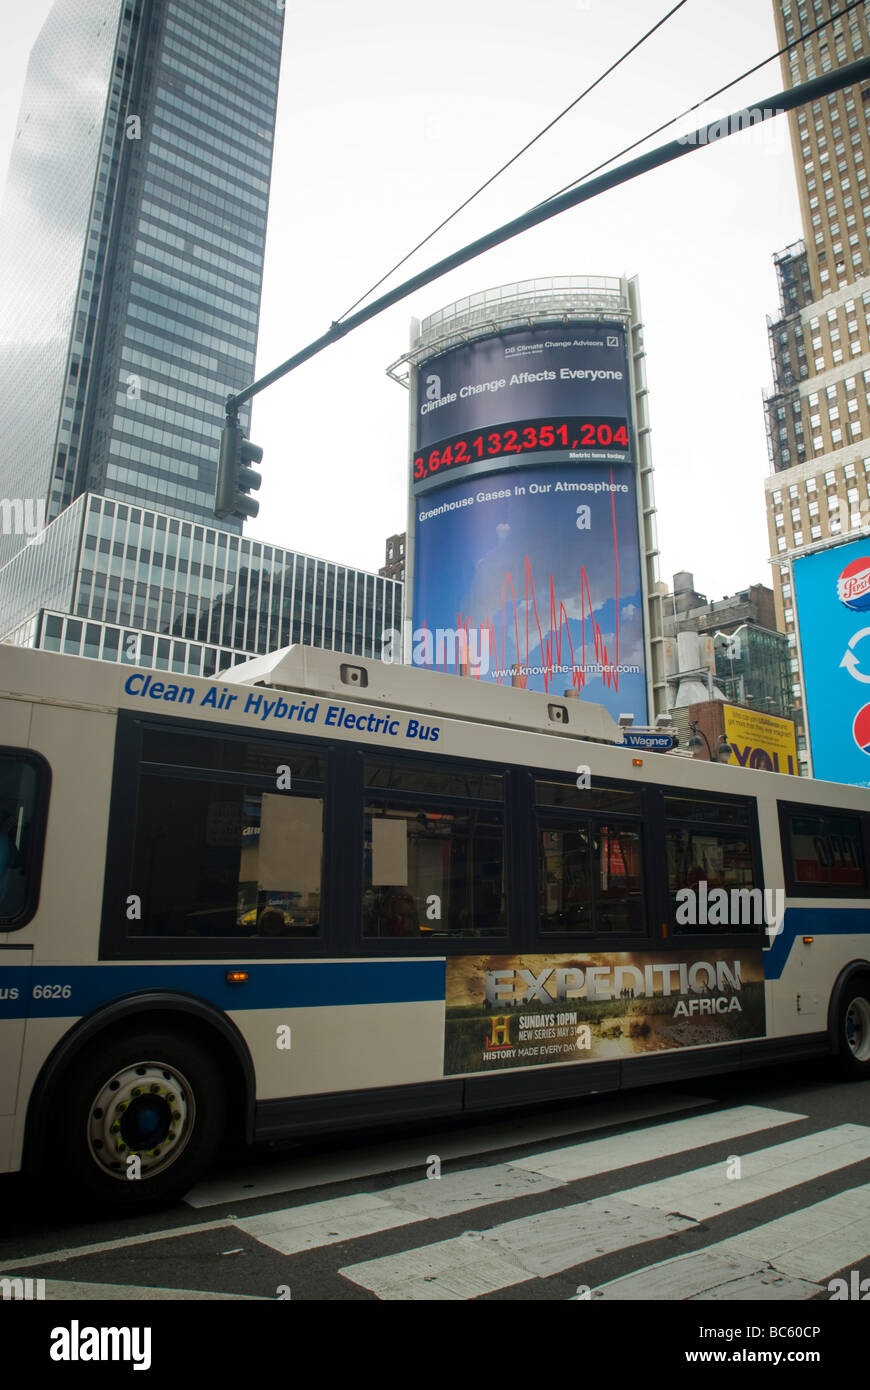 The Carbon Counter billboard in New York tracks the amount of greenhouse gases in the atmosphere Stock Photo